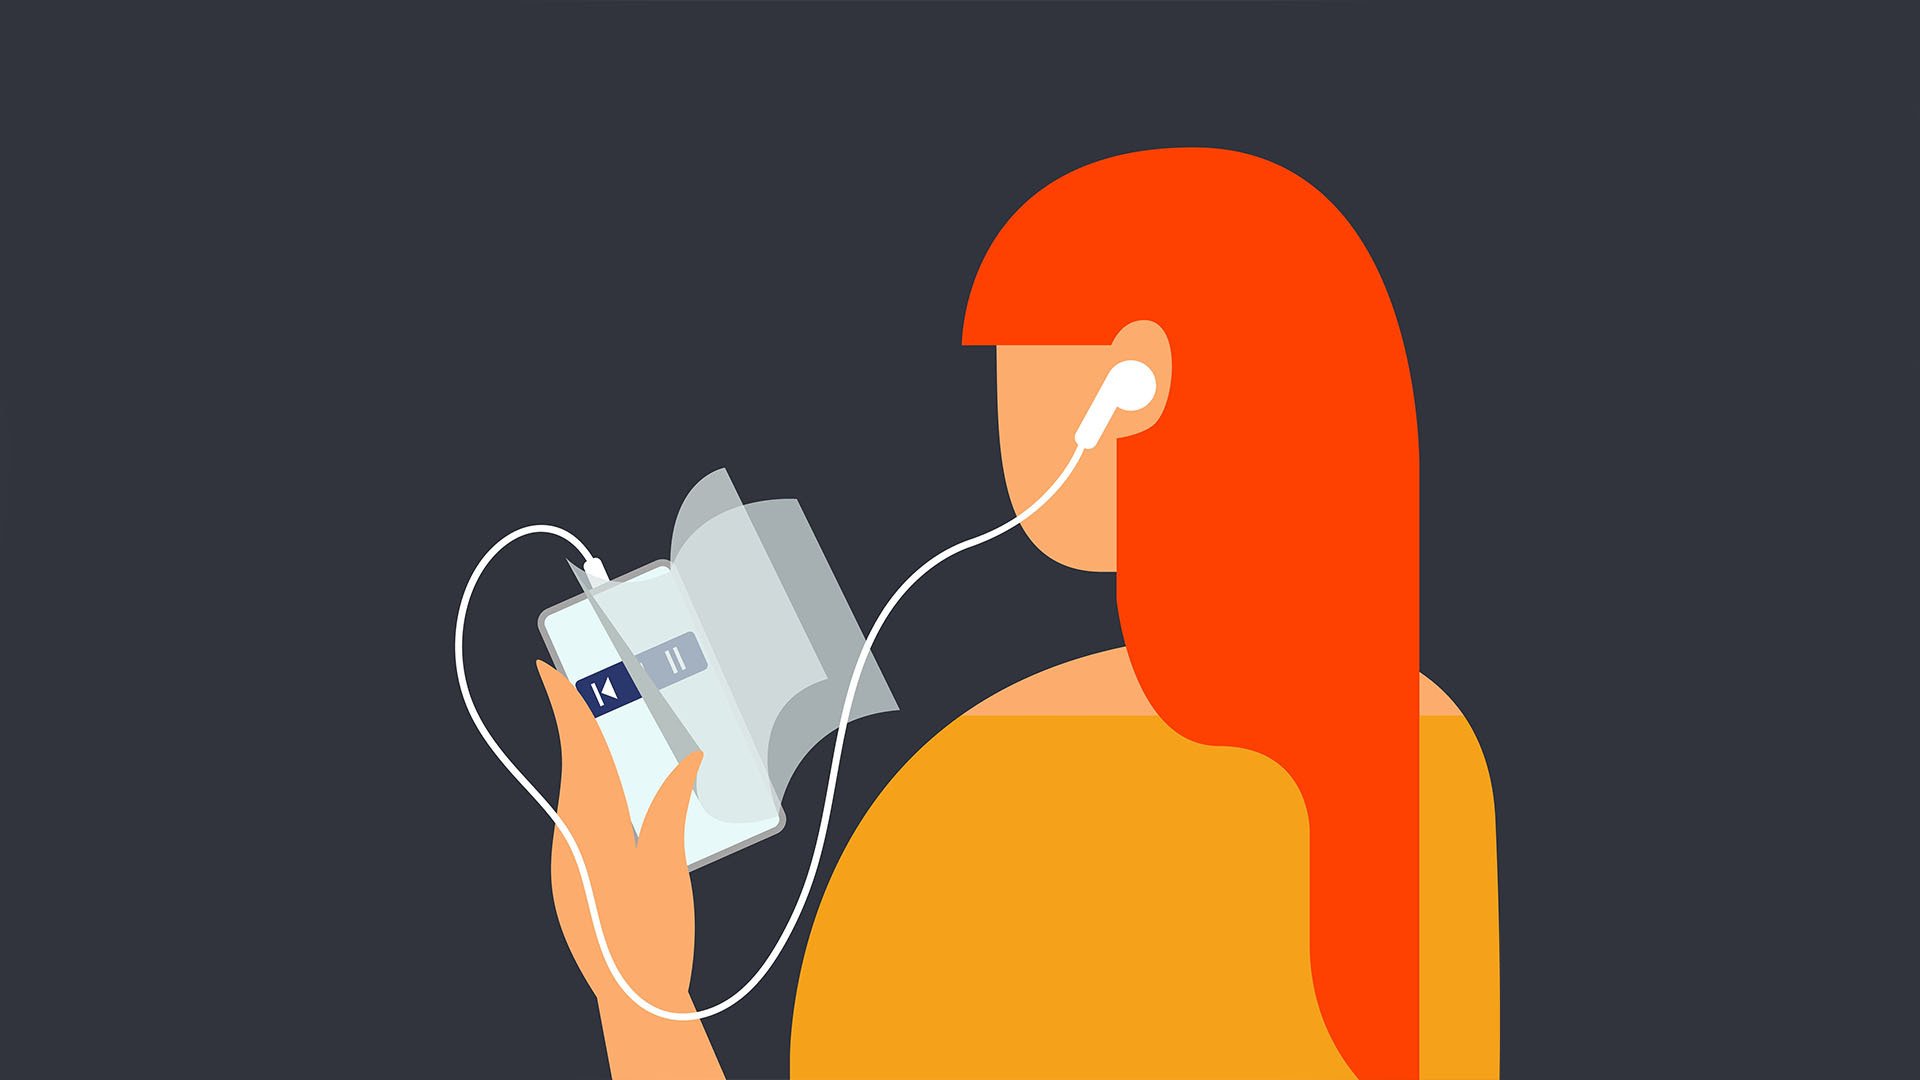 illustration of a person looking at their phone, which resembles a book. they are wearing headphones and have red hair and a yellow shirt.